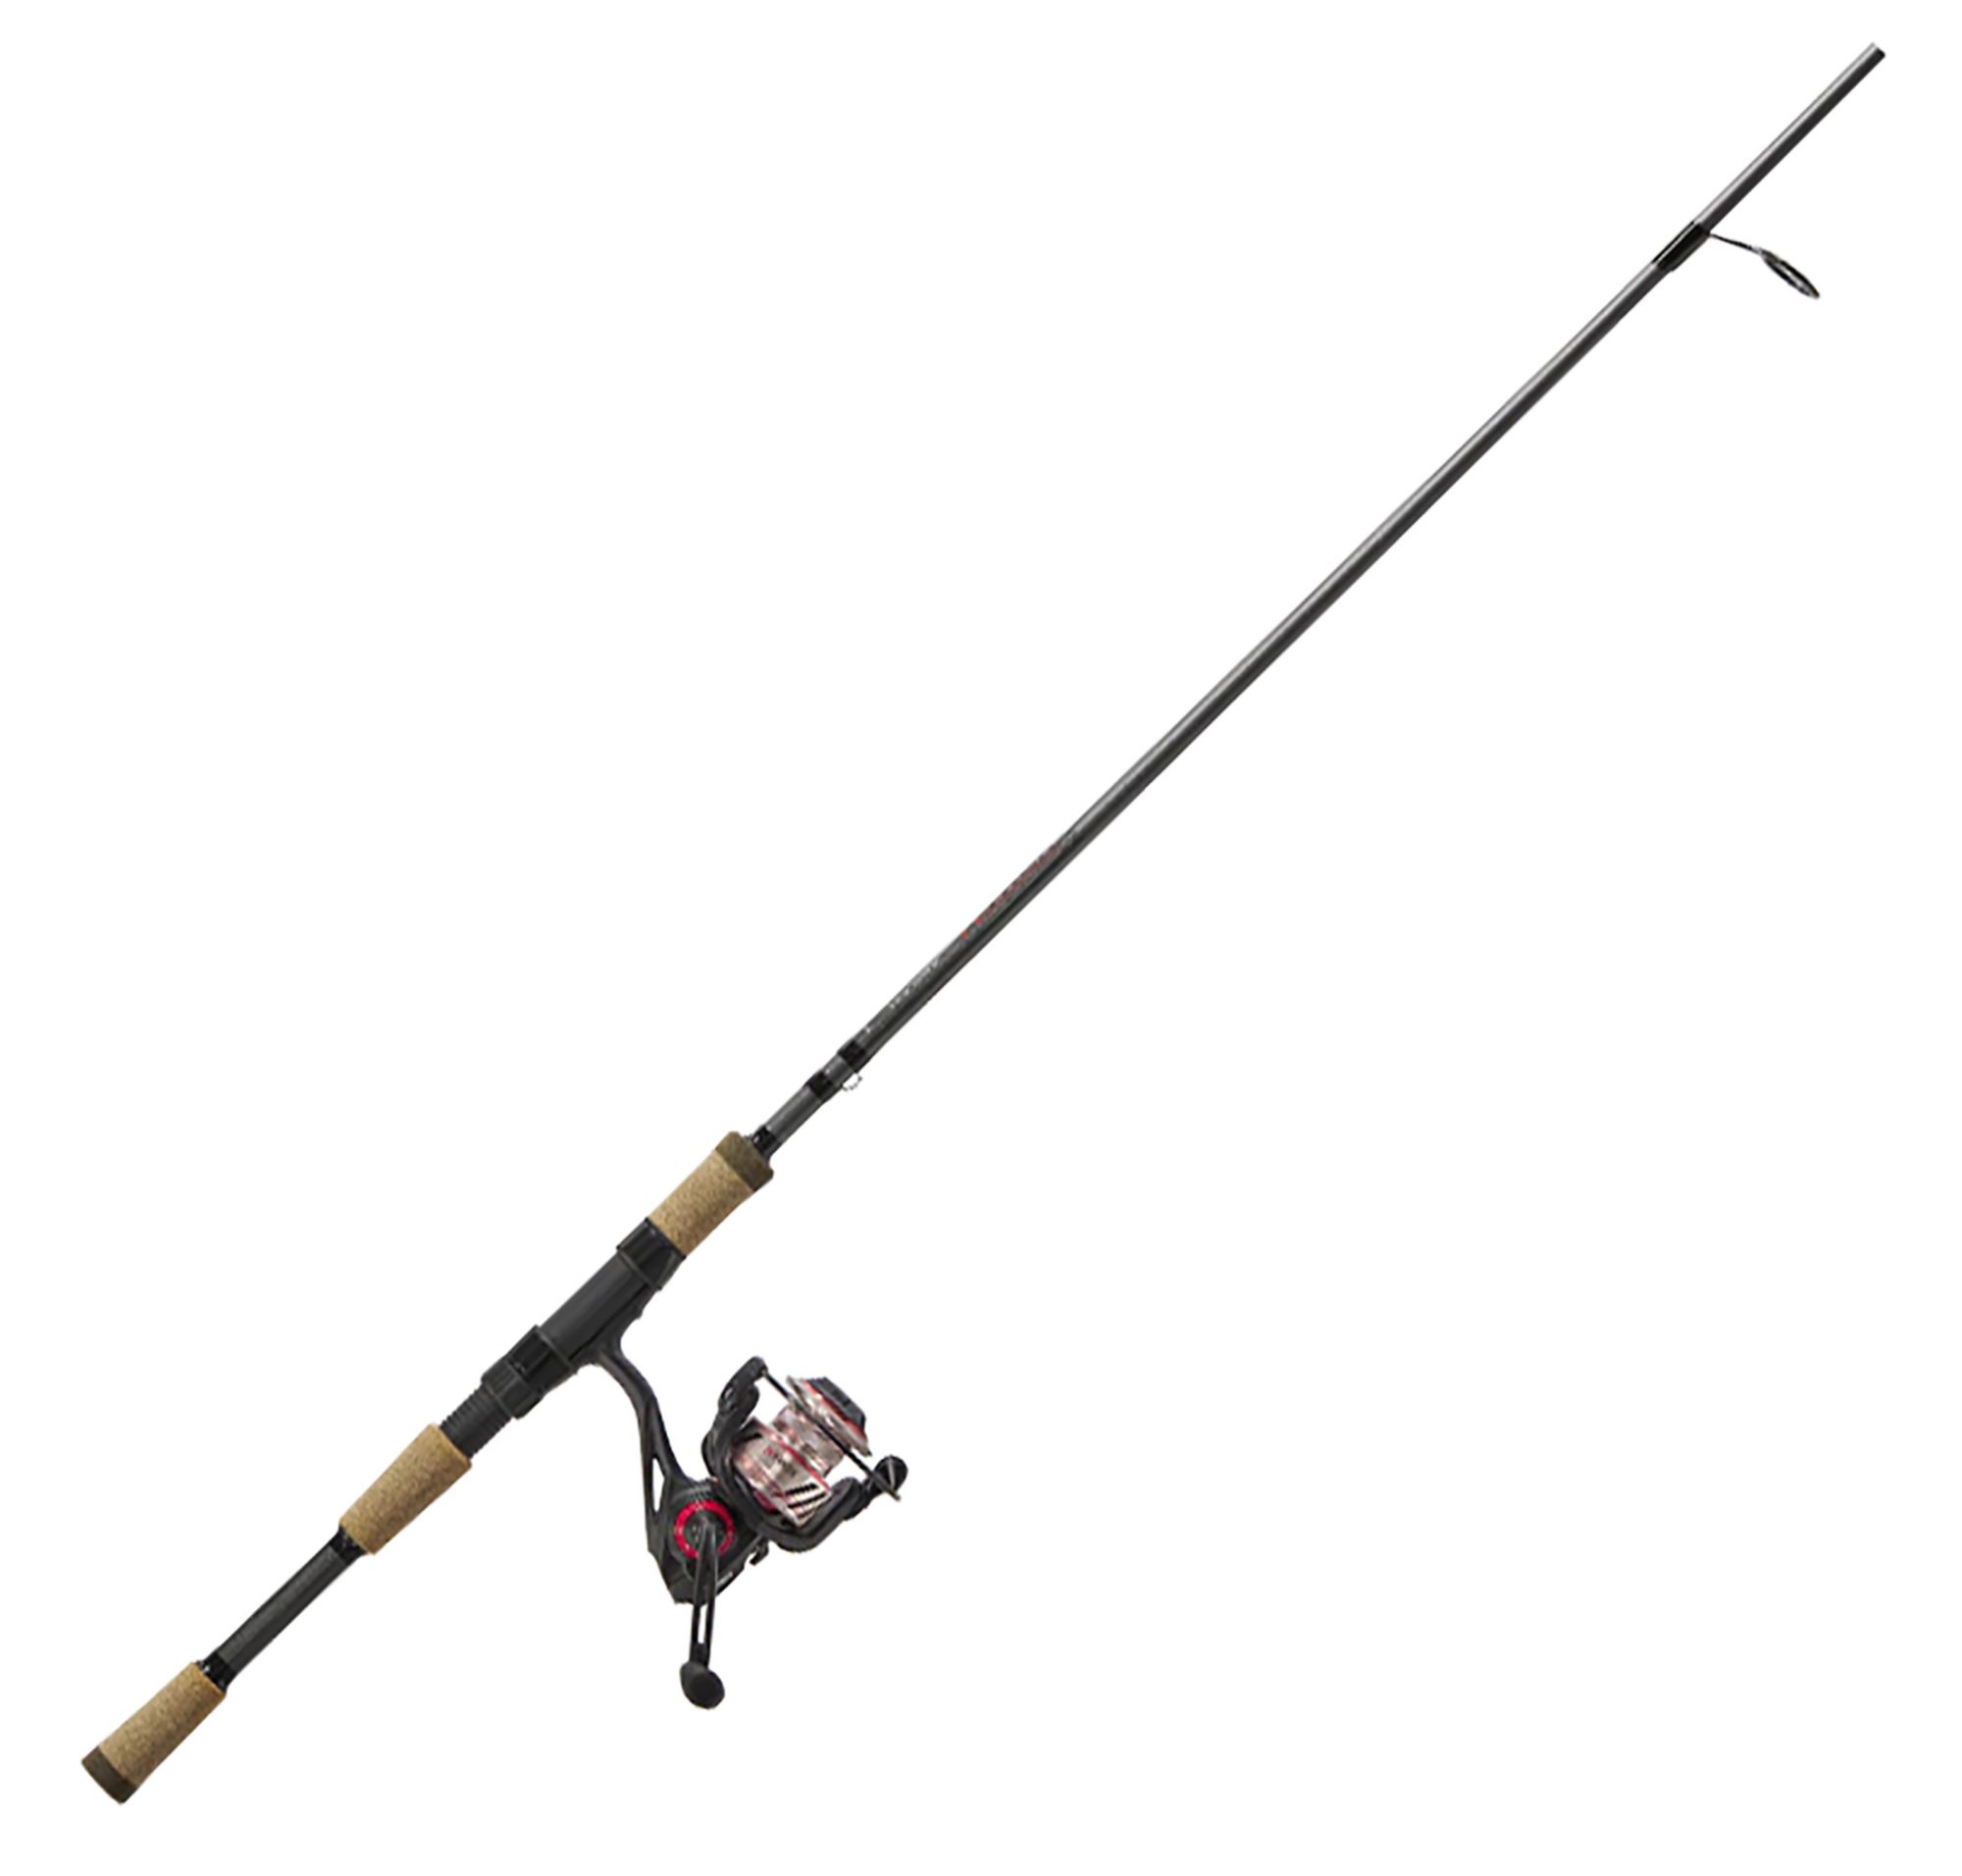 St. Croix Rods  Curbside Pickup Available at DICK'S